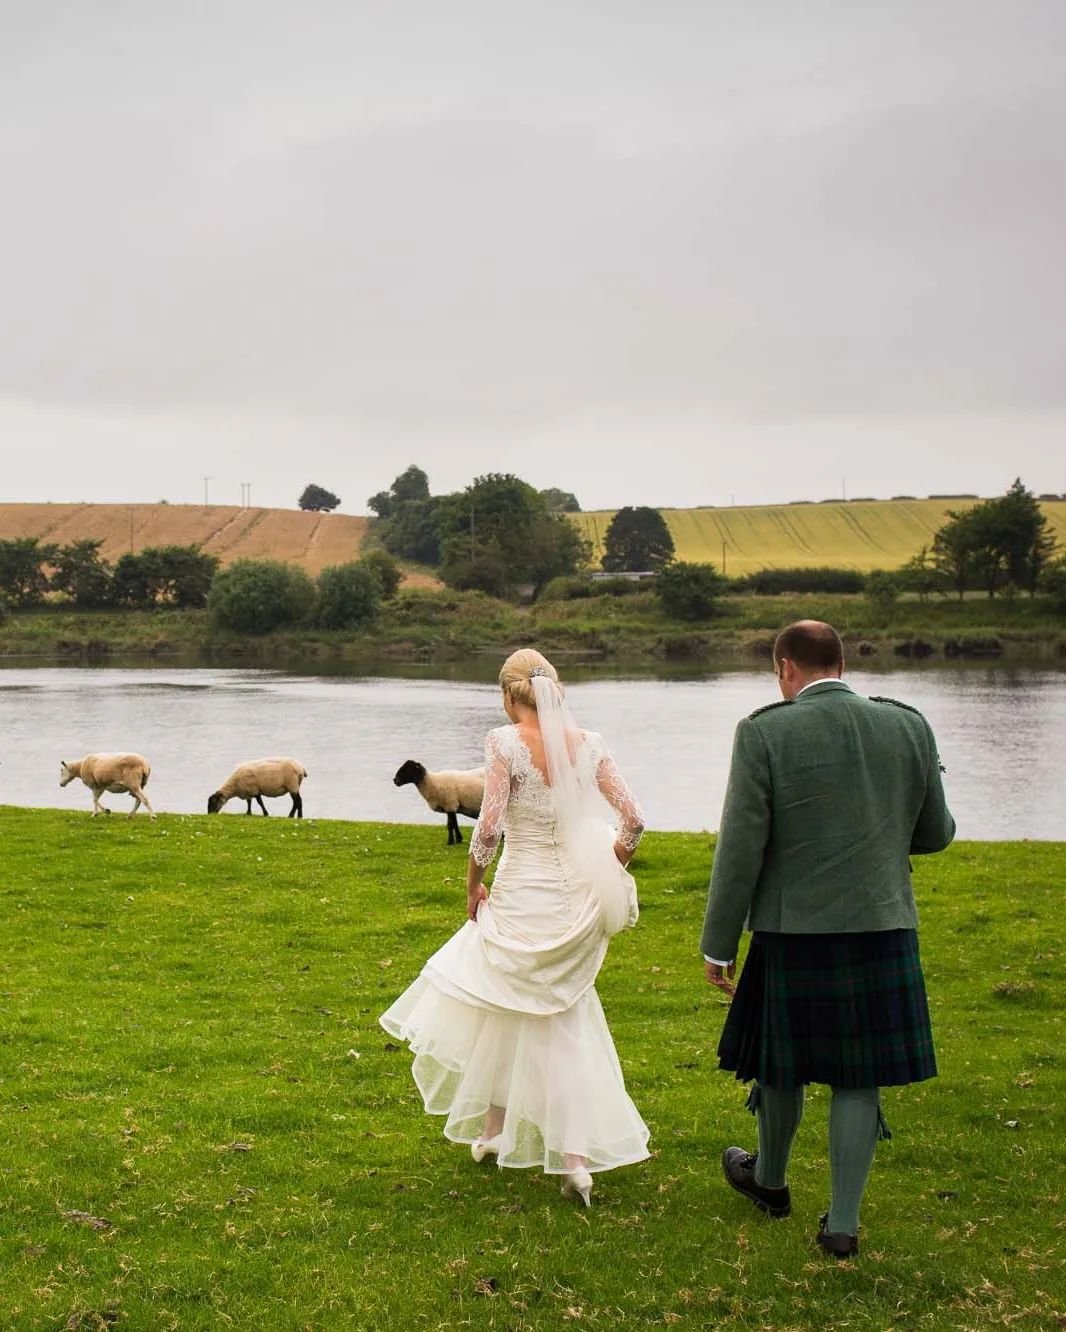 Sharing the banks of the River Tweed with some woolly friends..

Jen &amp; Andy

Taking a few minutes away from guests during their marquee wedding in Northumberland. 

#northumberlandweddingphotographer
#coupleportrait
#northeastweddingphotographer
